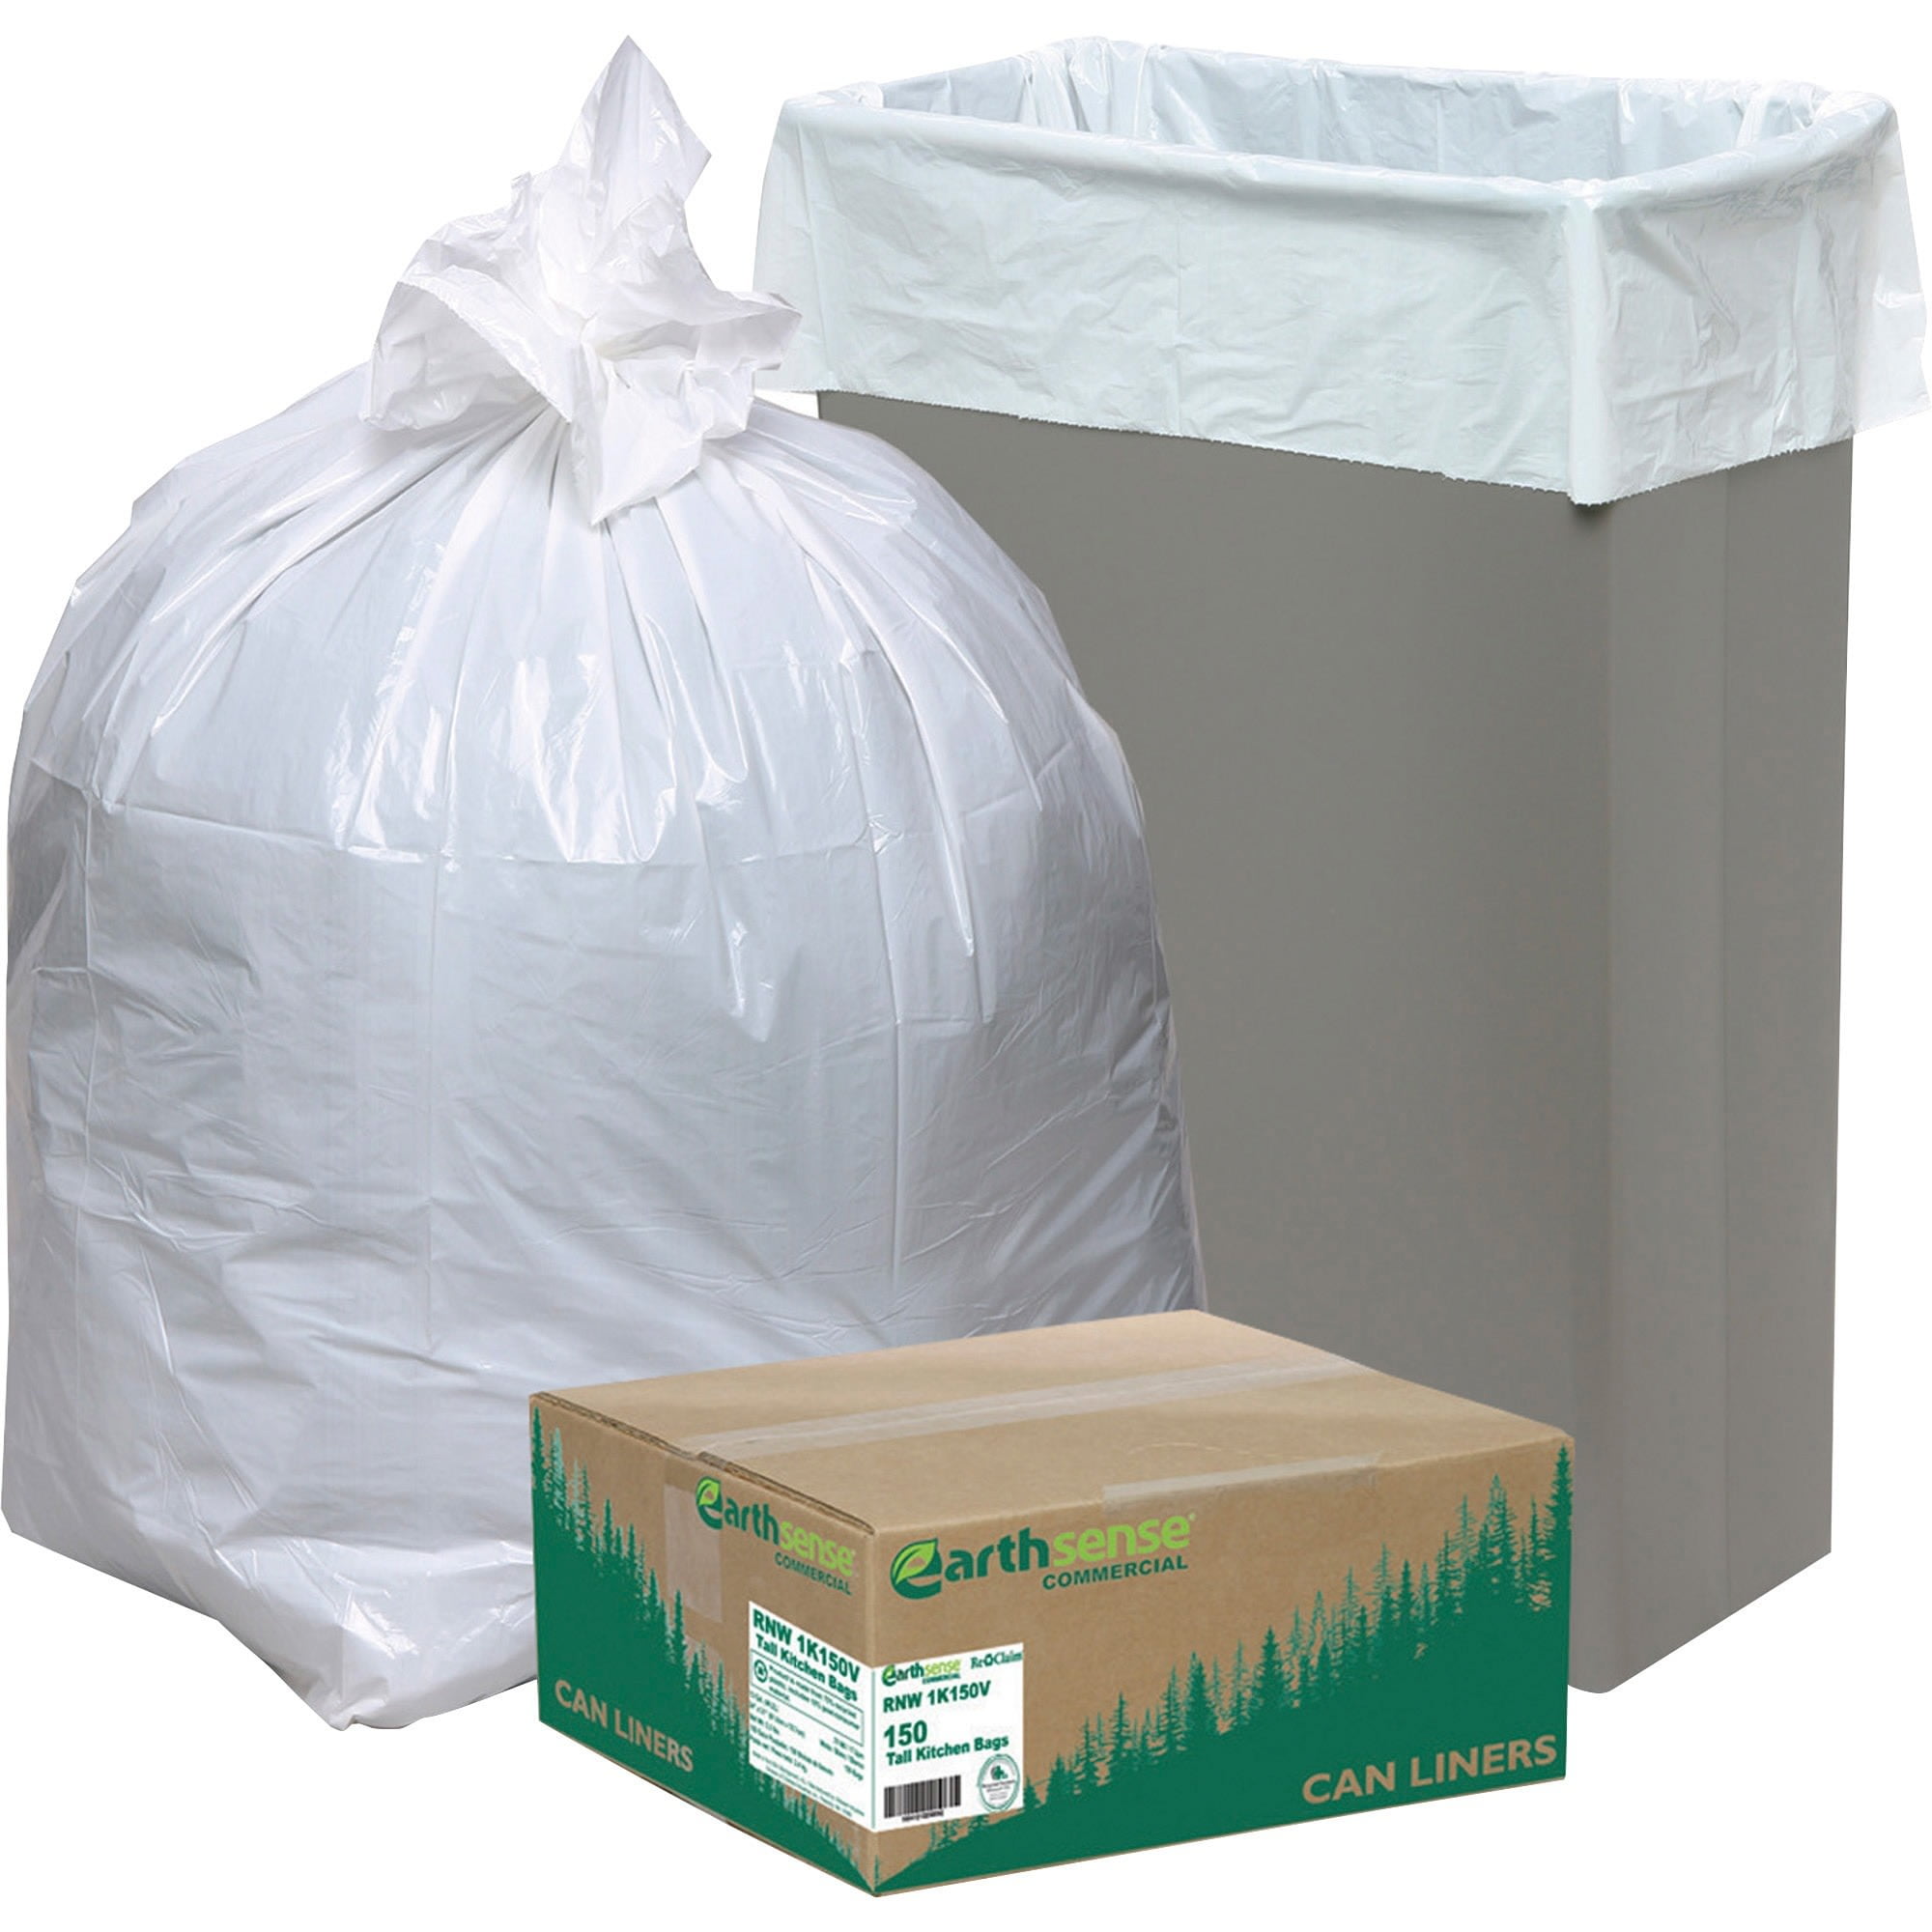 Wekioger 13 Gallon Kitchen Trash Bags, Clear Garbage Bags, 150 Counts